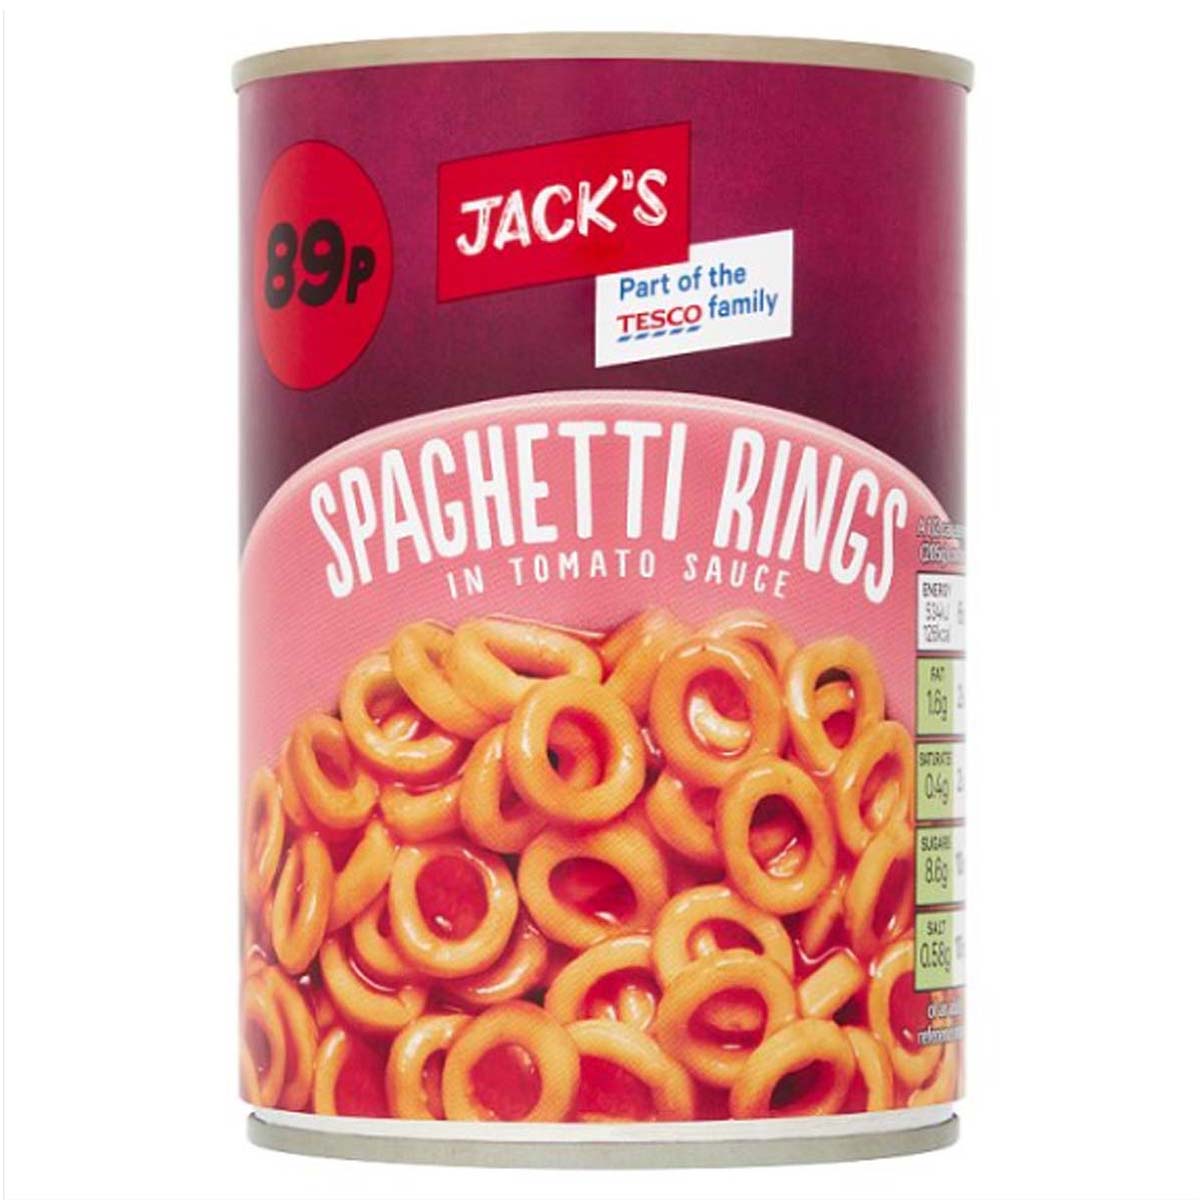 Jack's - Spaghetti Hoops in Tomato Sauce - 395g - Continental Food Store